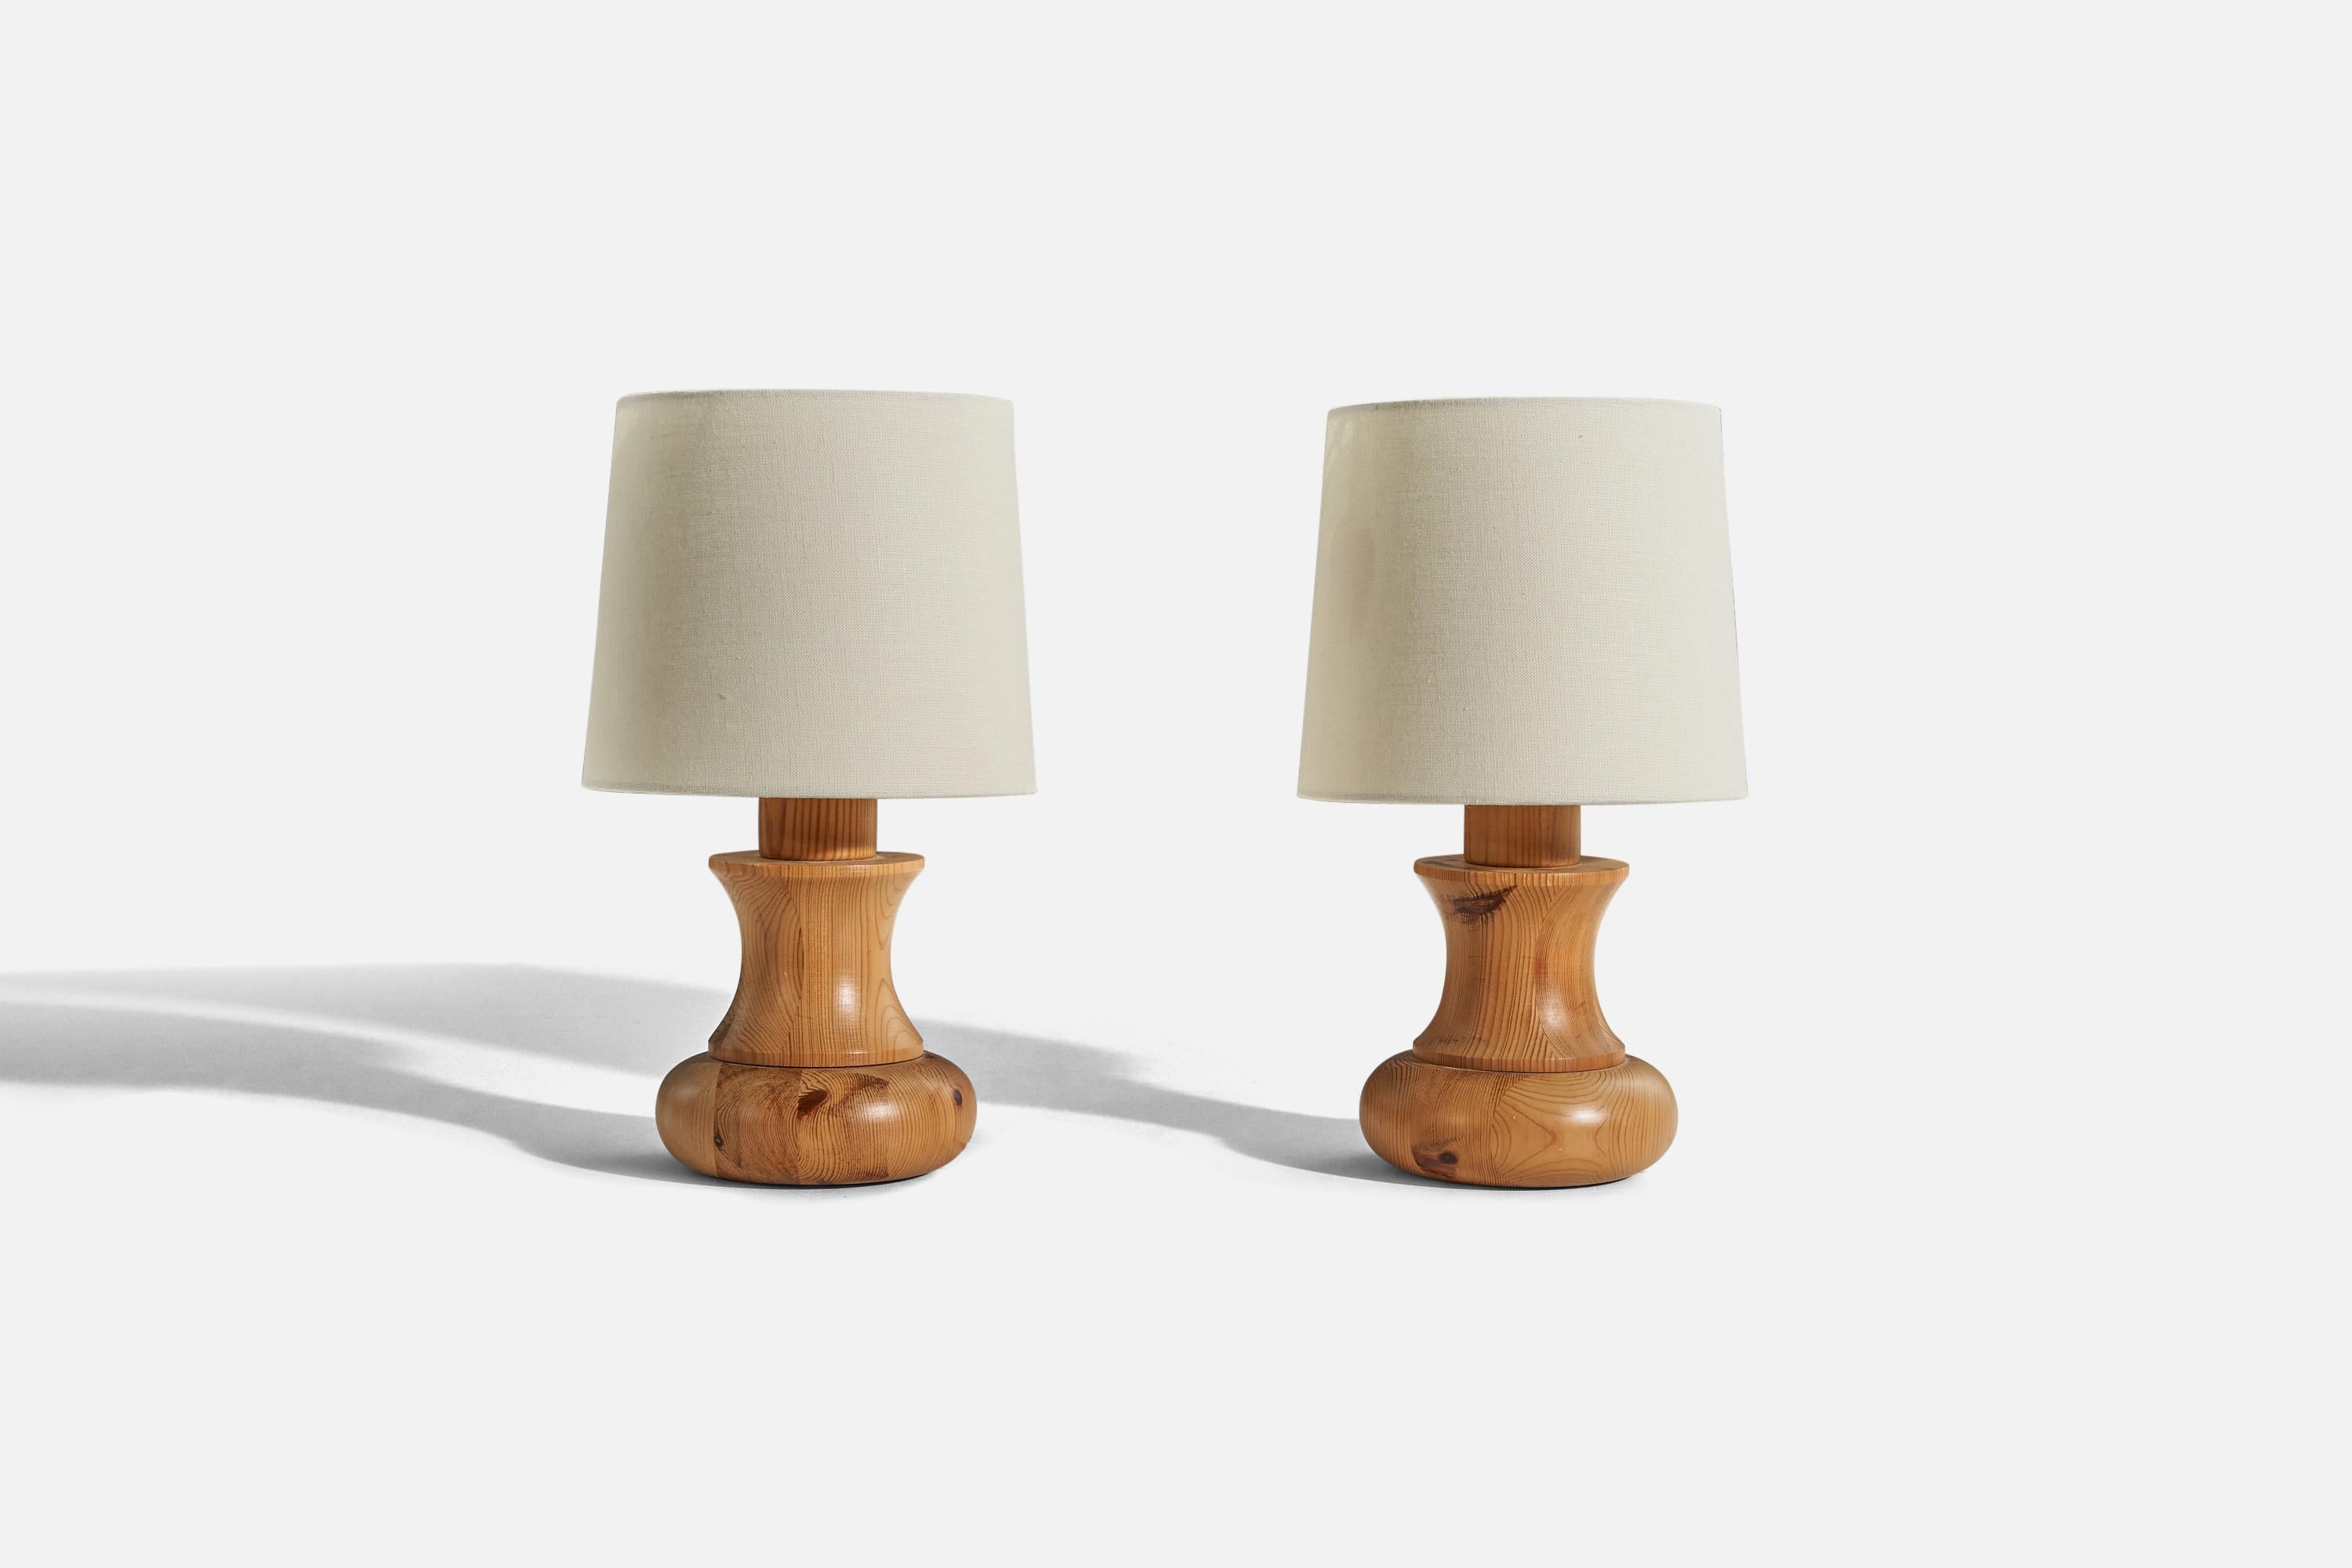 A pair of pine table lamps designed and produced in Sweden, 1970s. 

Sold without lampshade. 
Dimensions of Lamp (inches) : 8.31 x 5.87 x 5.87 (H x W x D)
Dimensions of Shade (inches) : 7 x 8 x 7 (T x B x S)
Dimension of Lamp with Shade